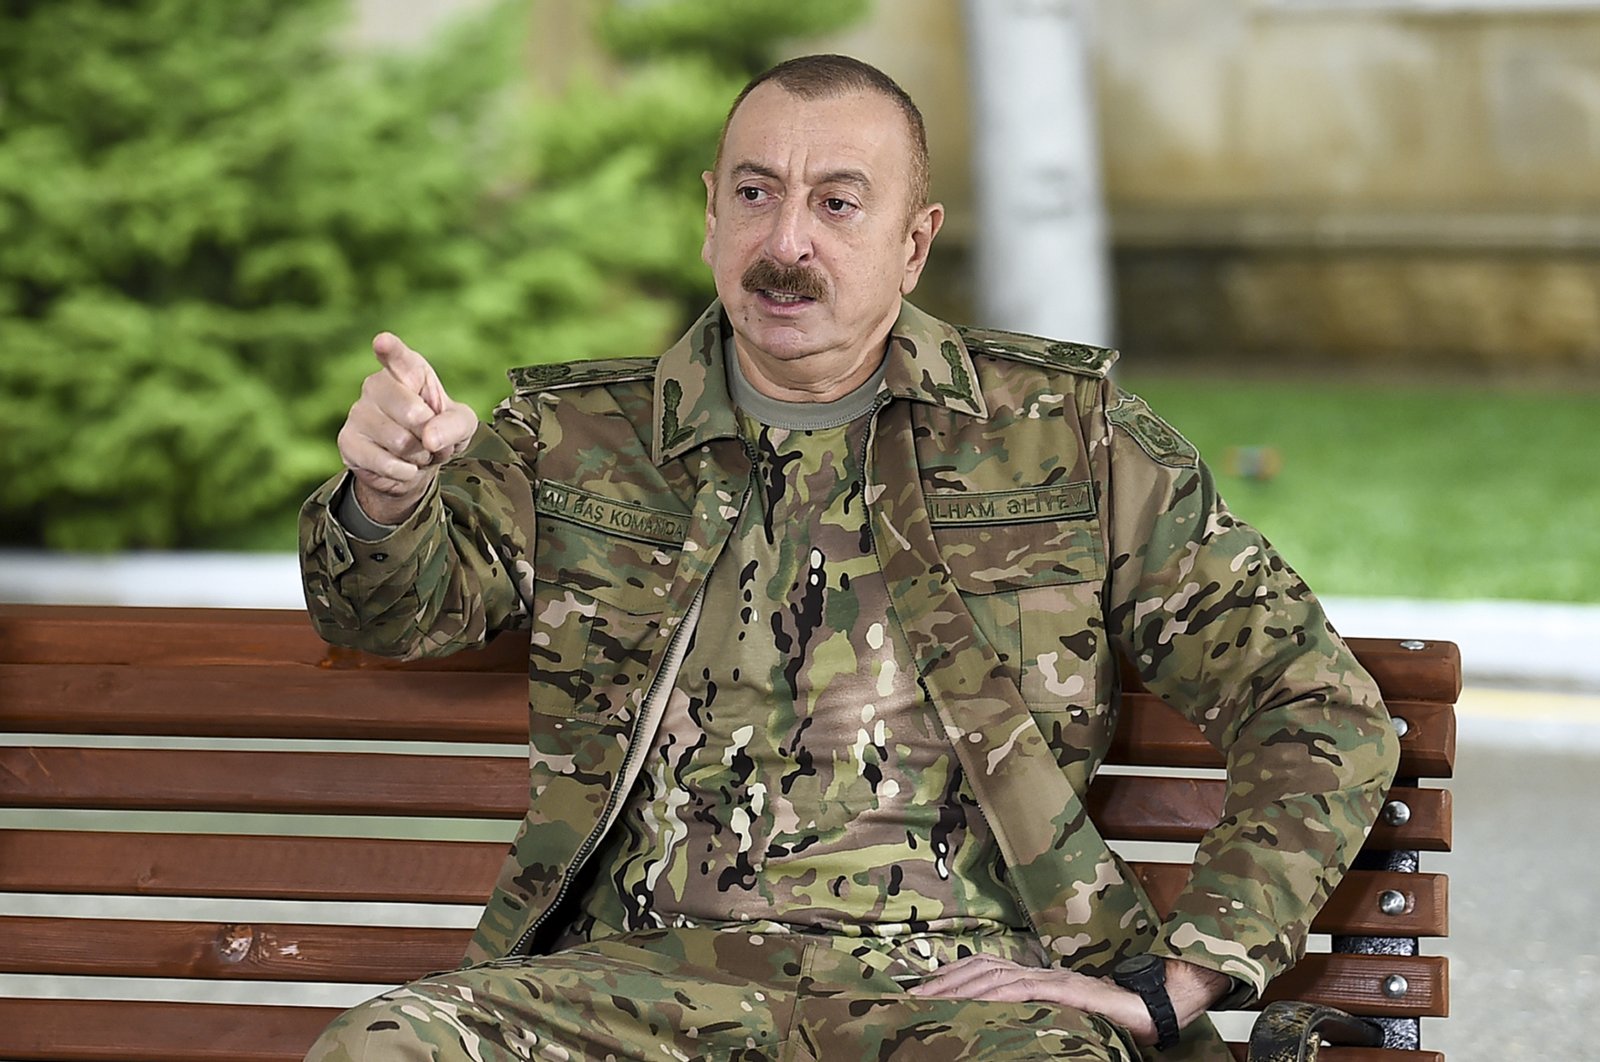 Azerbaijani President Ilham Aliyev gestures during a meeting with servicepeople undergoing treatment at the Clinical Medical Center No. 1 in Baku, Azerbaijan, Nov. 11, 2020. (AP Photo)